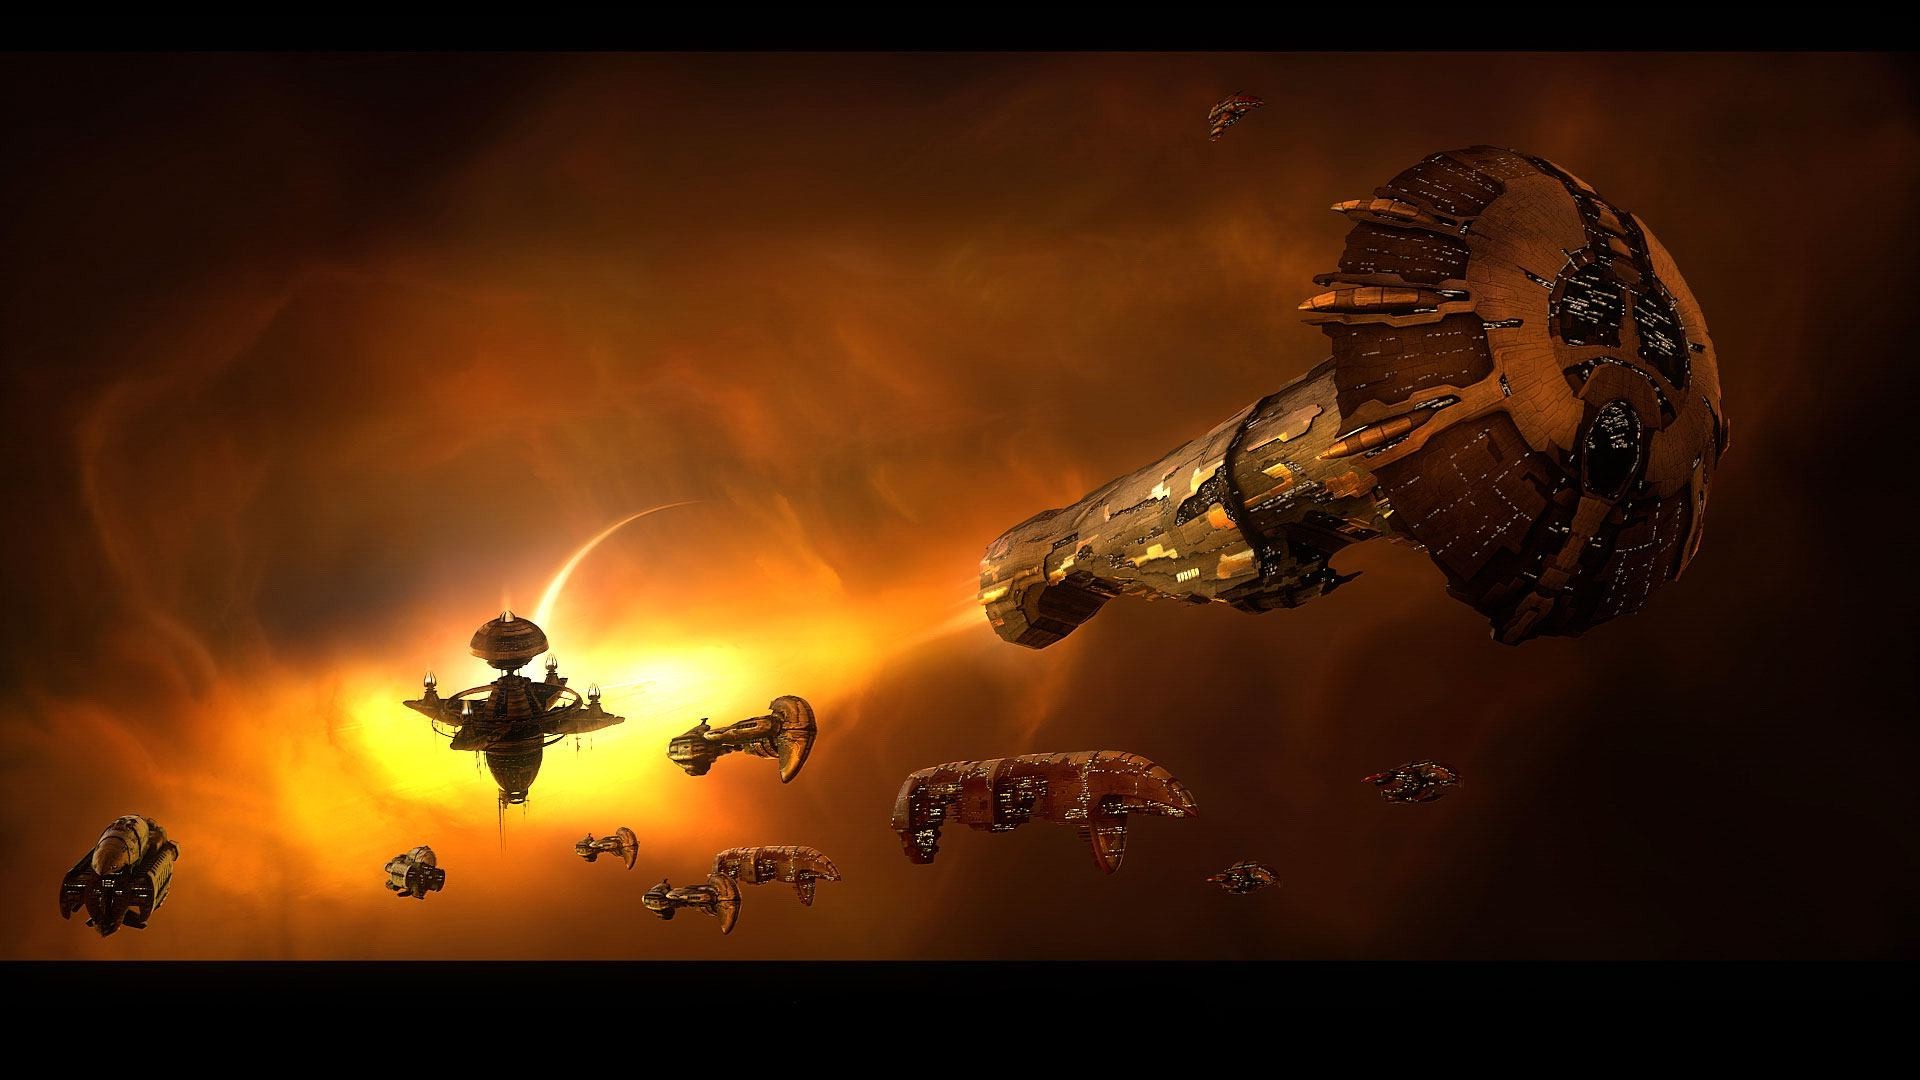 EVE, EVE Online, Amarr, Space, Spaceship Wallpaper